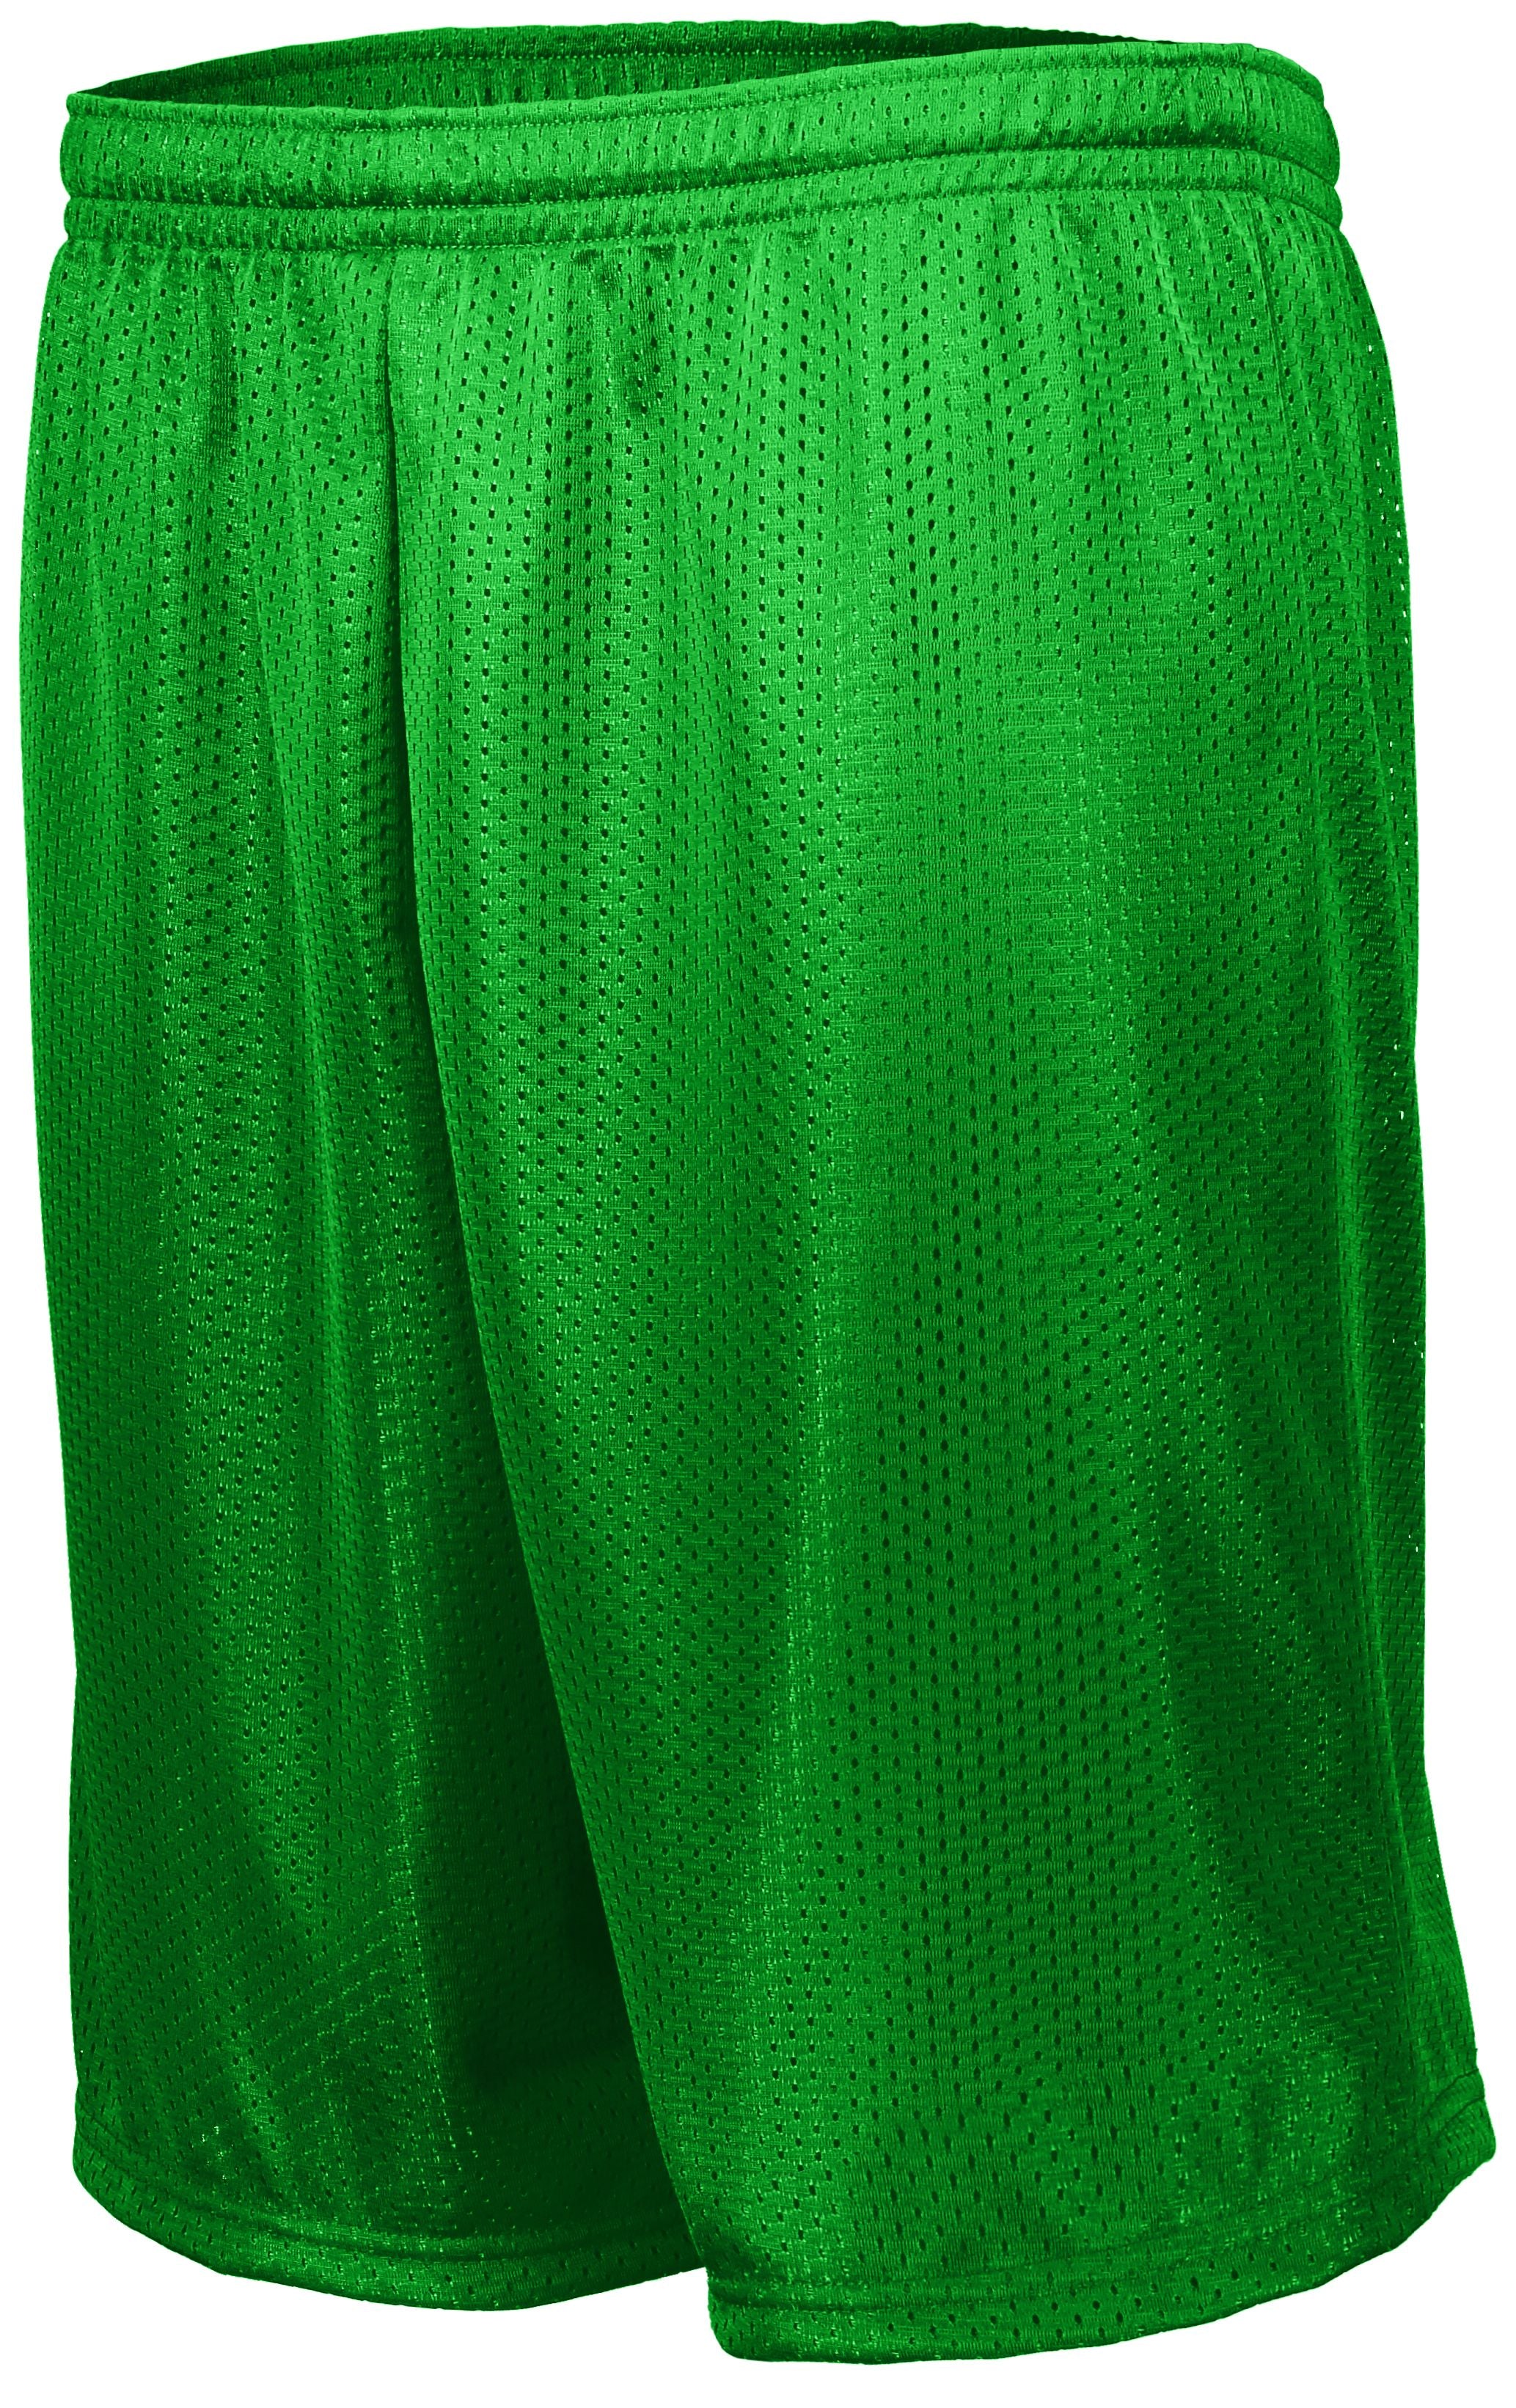 Augusta Sportswear Longer Length Tricot Mesh Shorts in Kelly  -Part of the Adult, Adult-Shorts, Augusta-Products product lines at KanaleyCreations.com